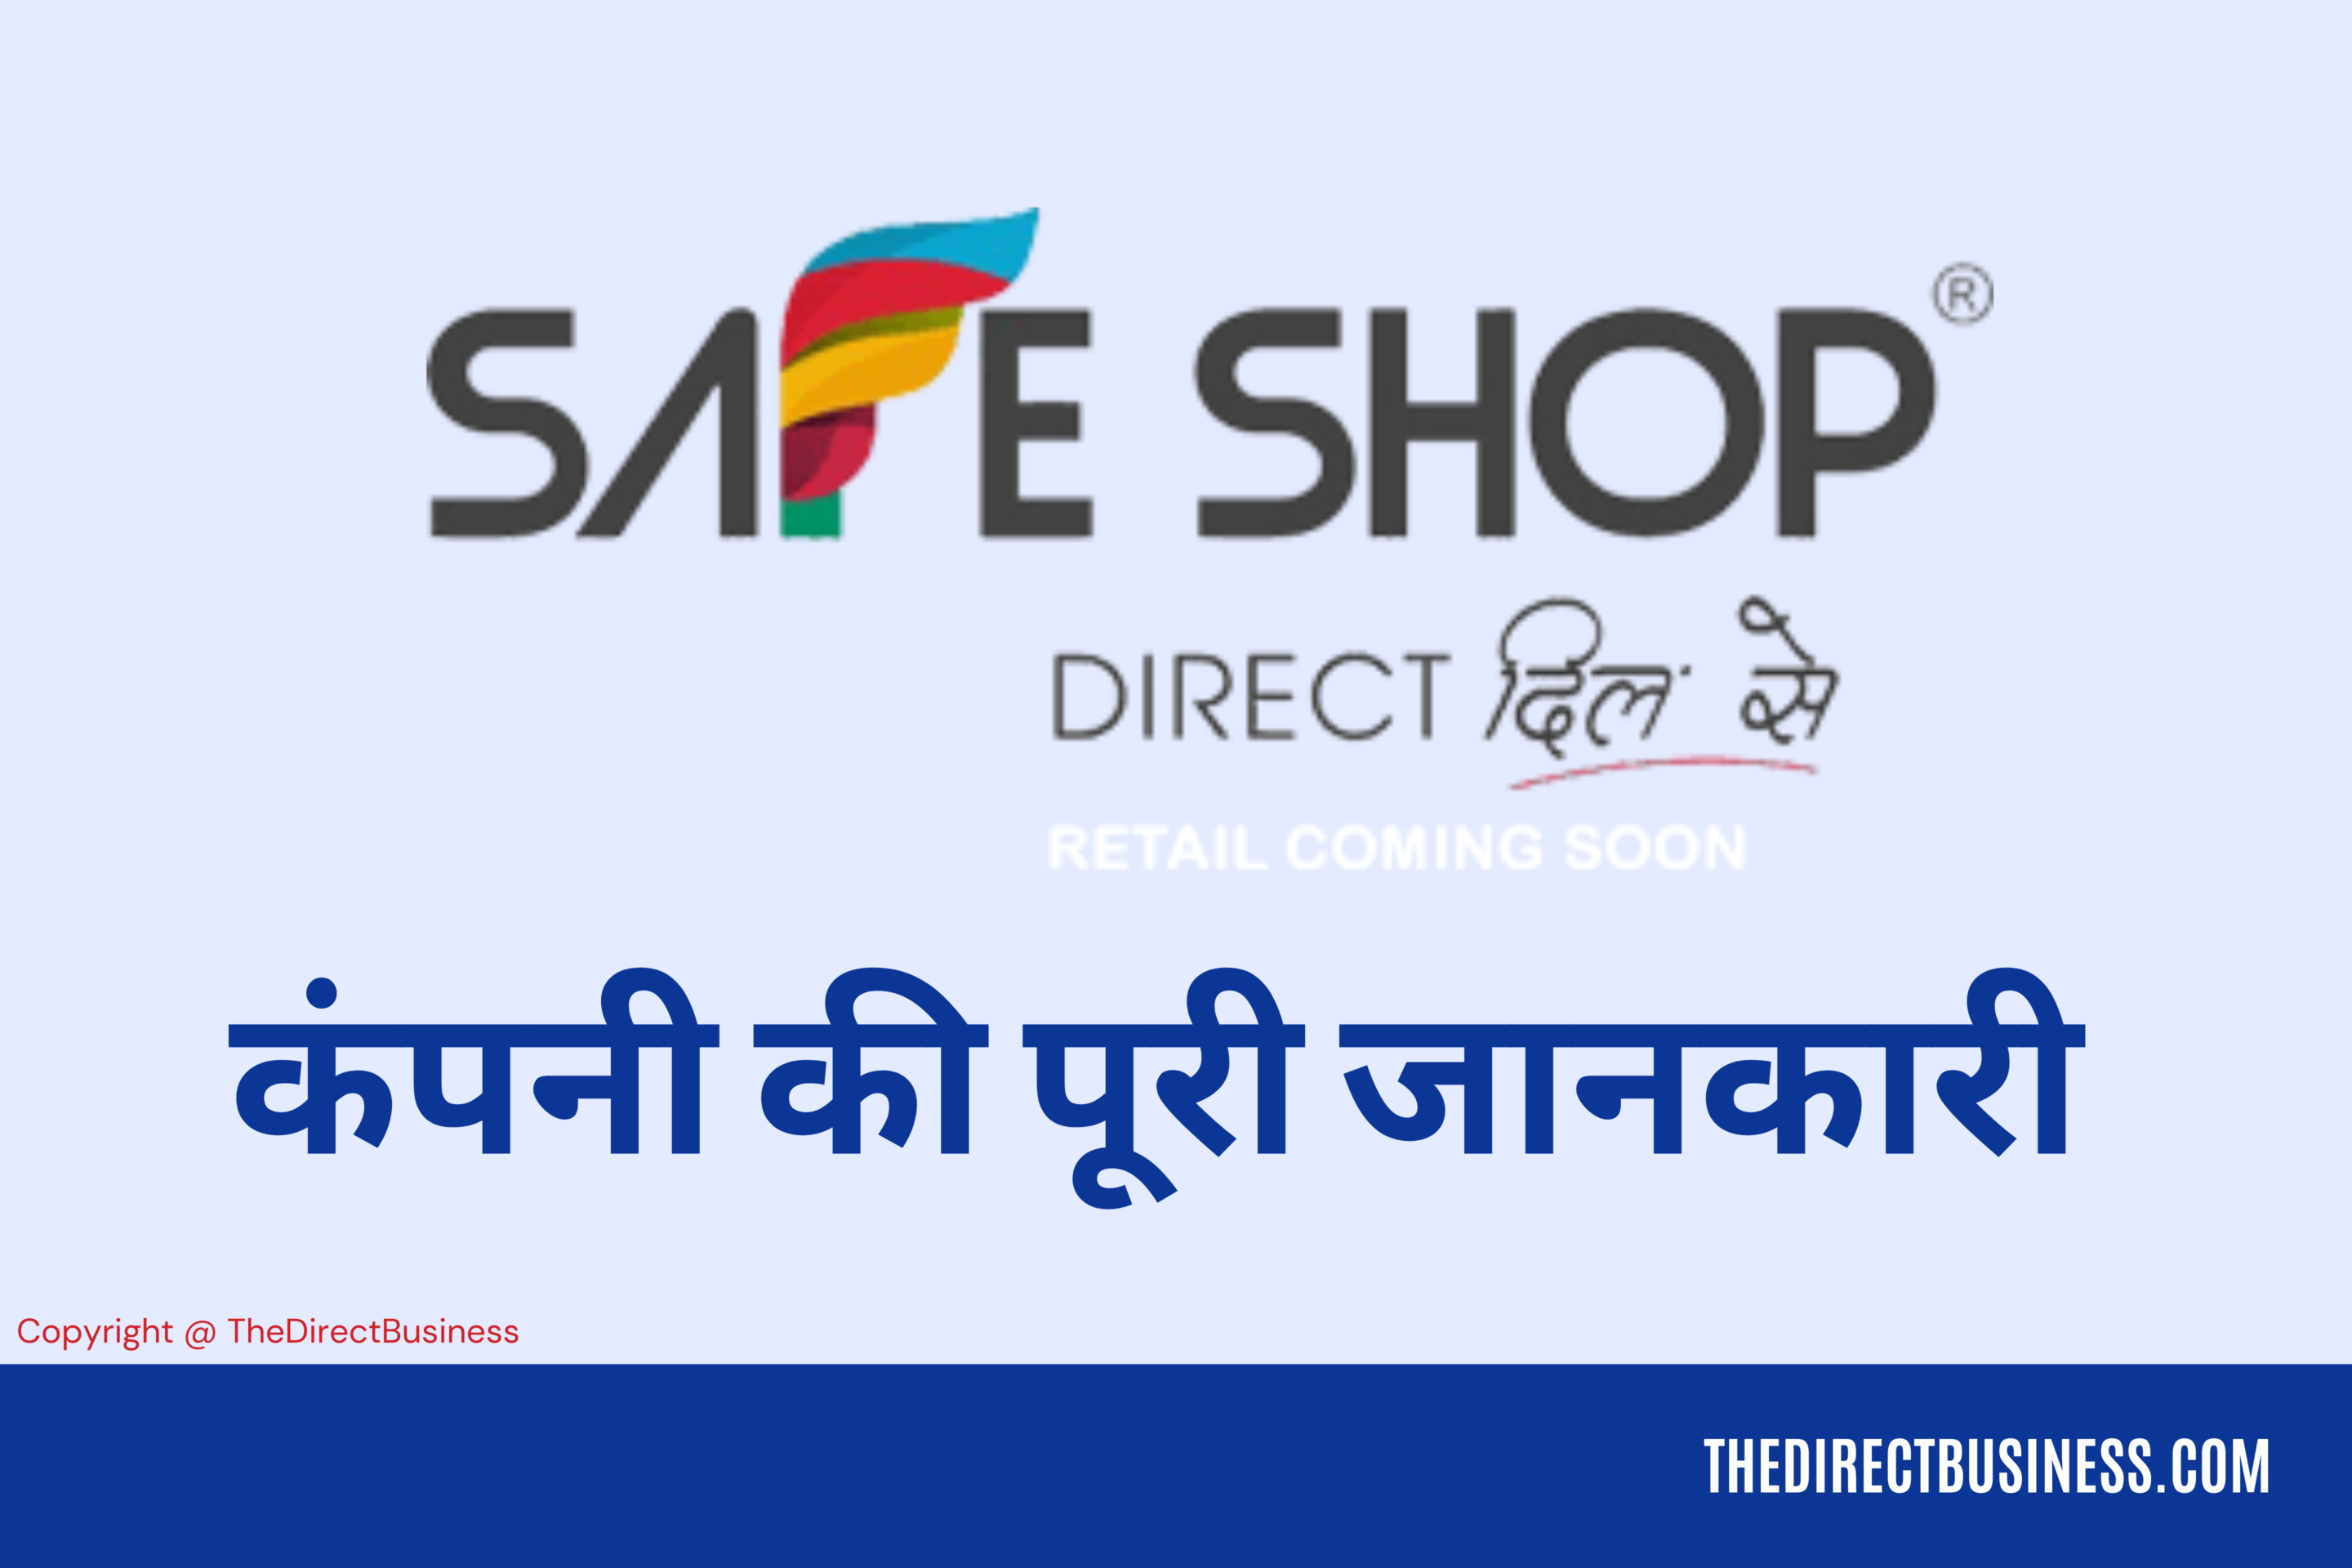 safe-shop-company-details-in-hindi